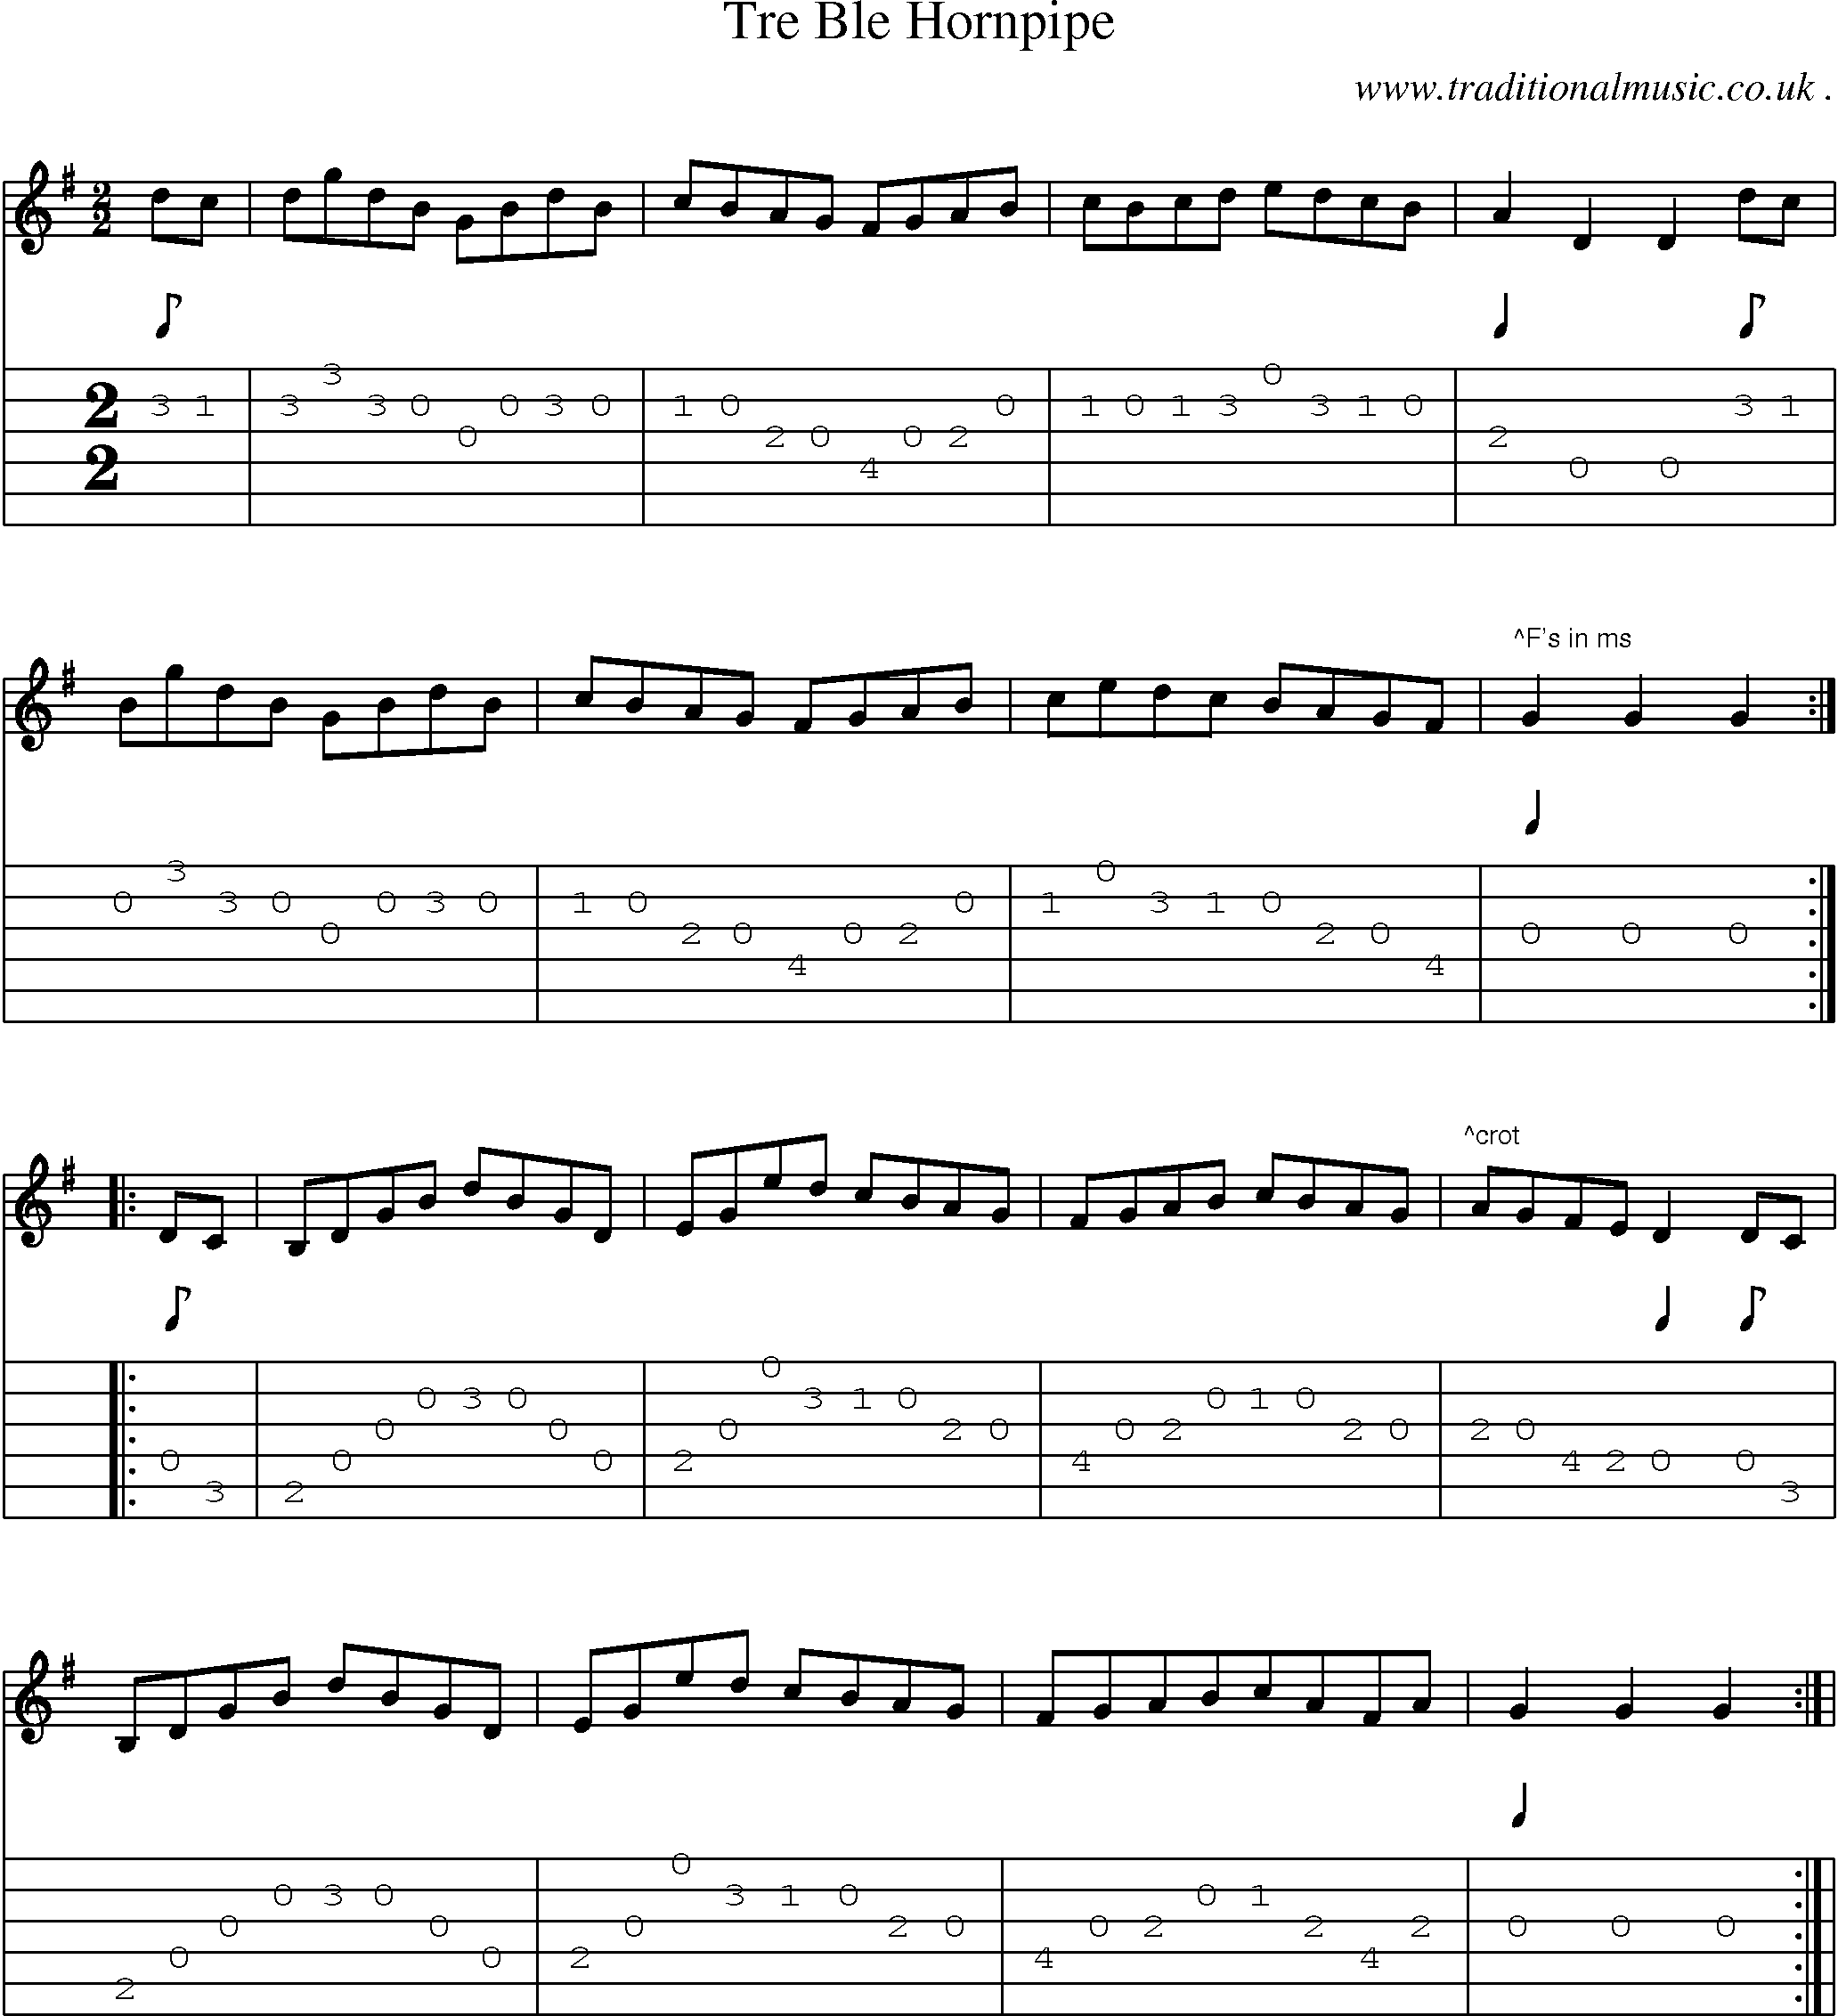 Sheet-Music and Guitar Tabs for Tre Ble Hornpipe